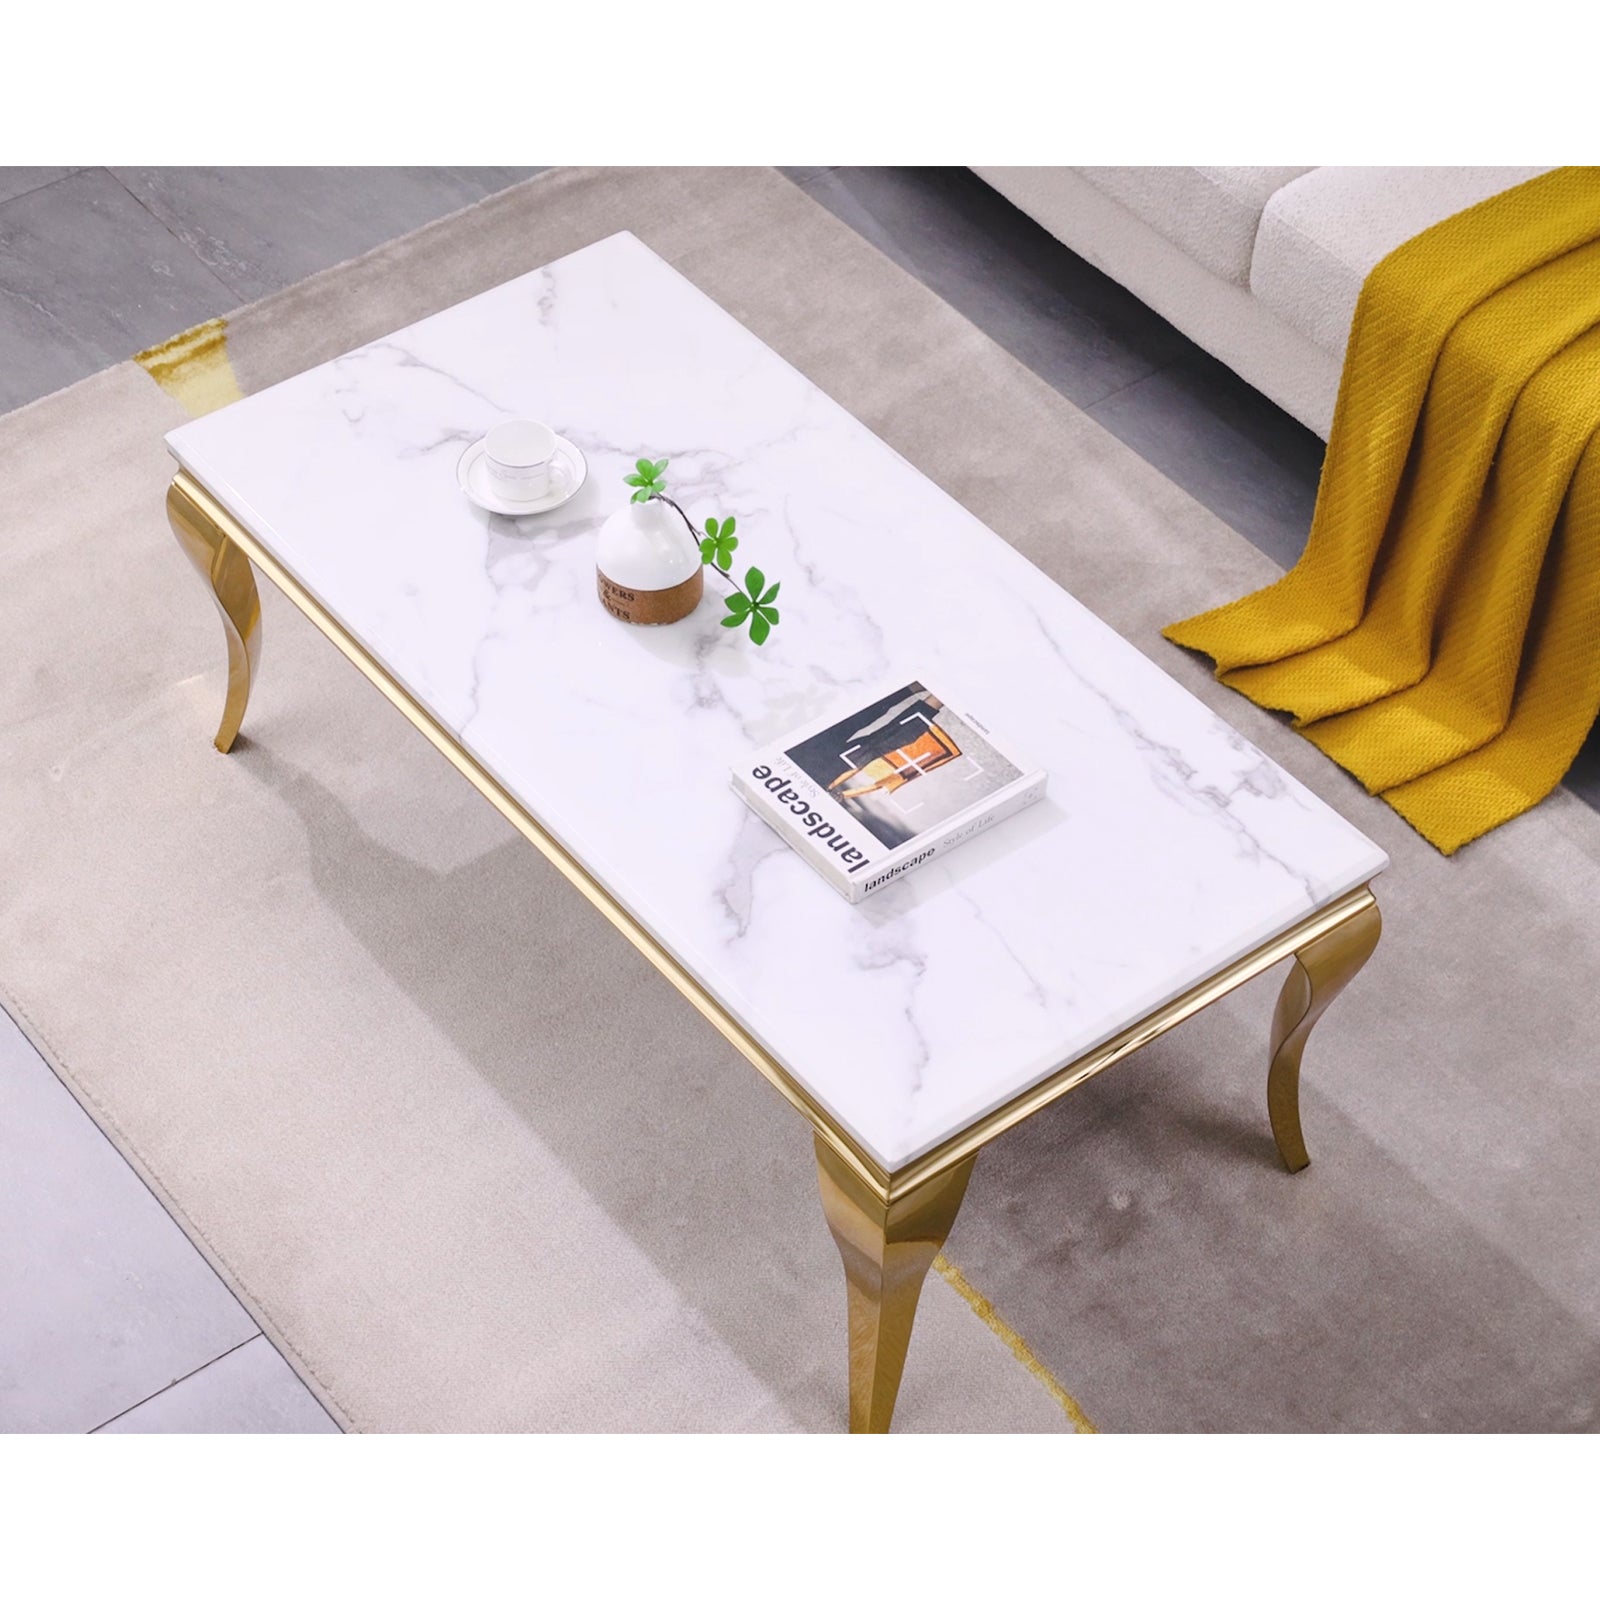 White Coffee Table with Gold Cabriole Legs | F316